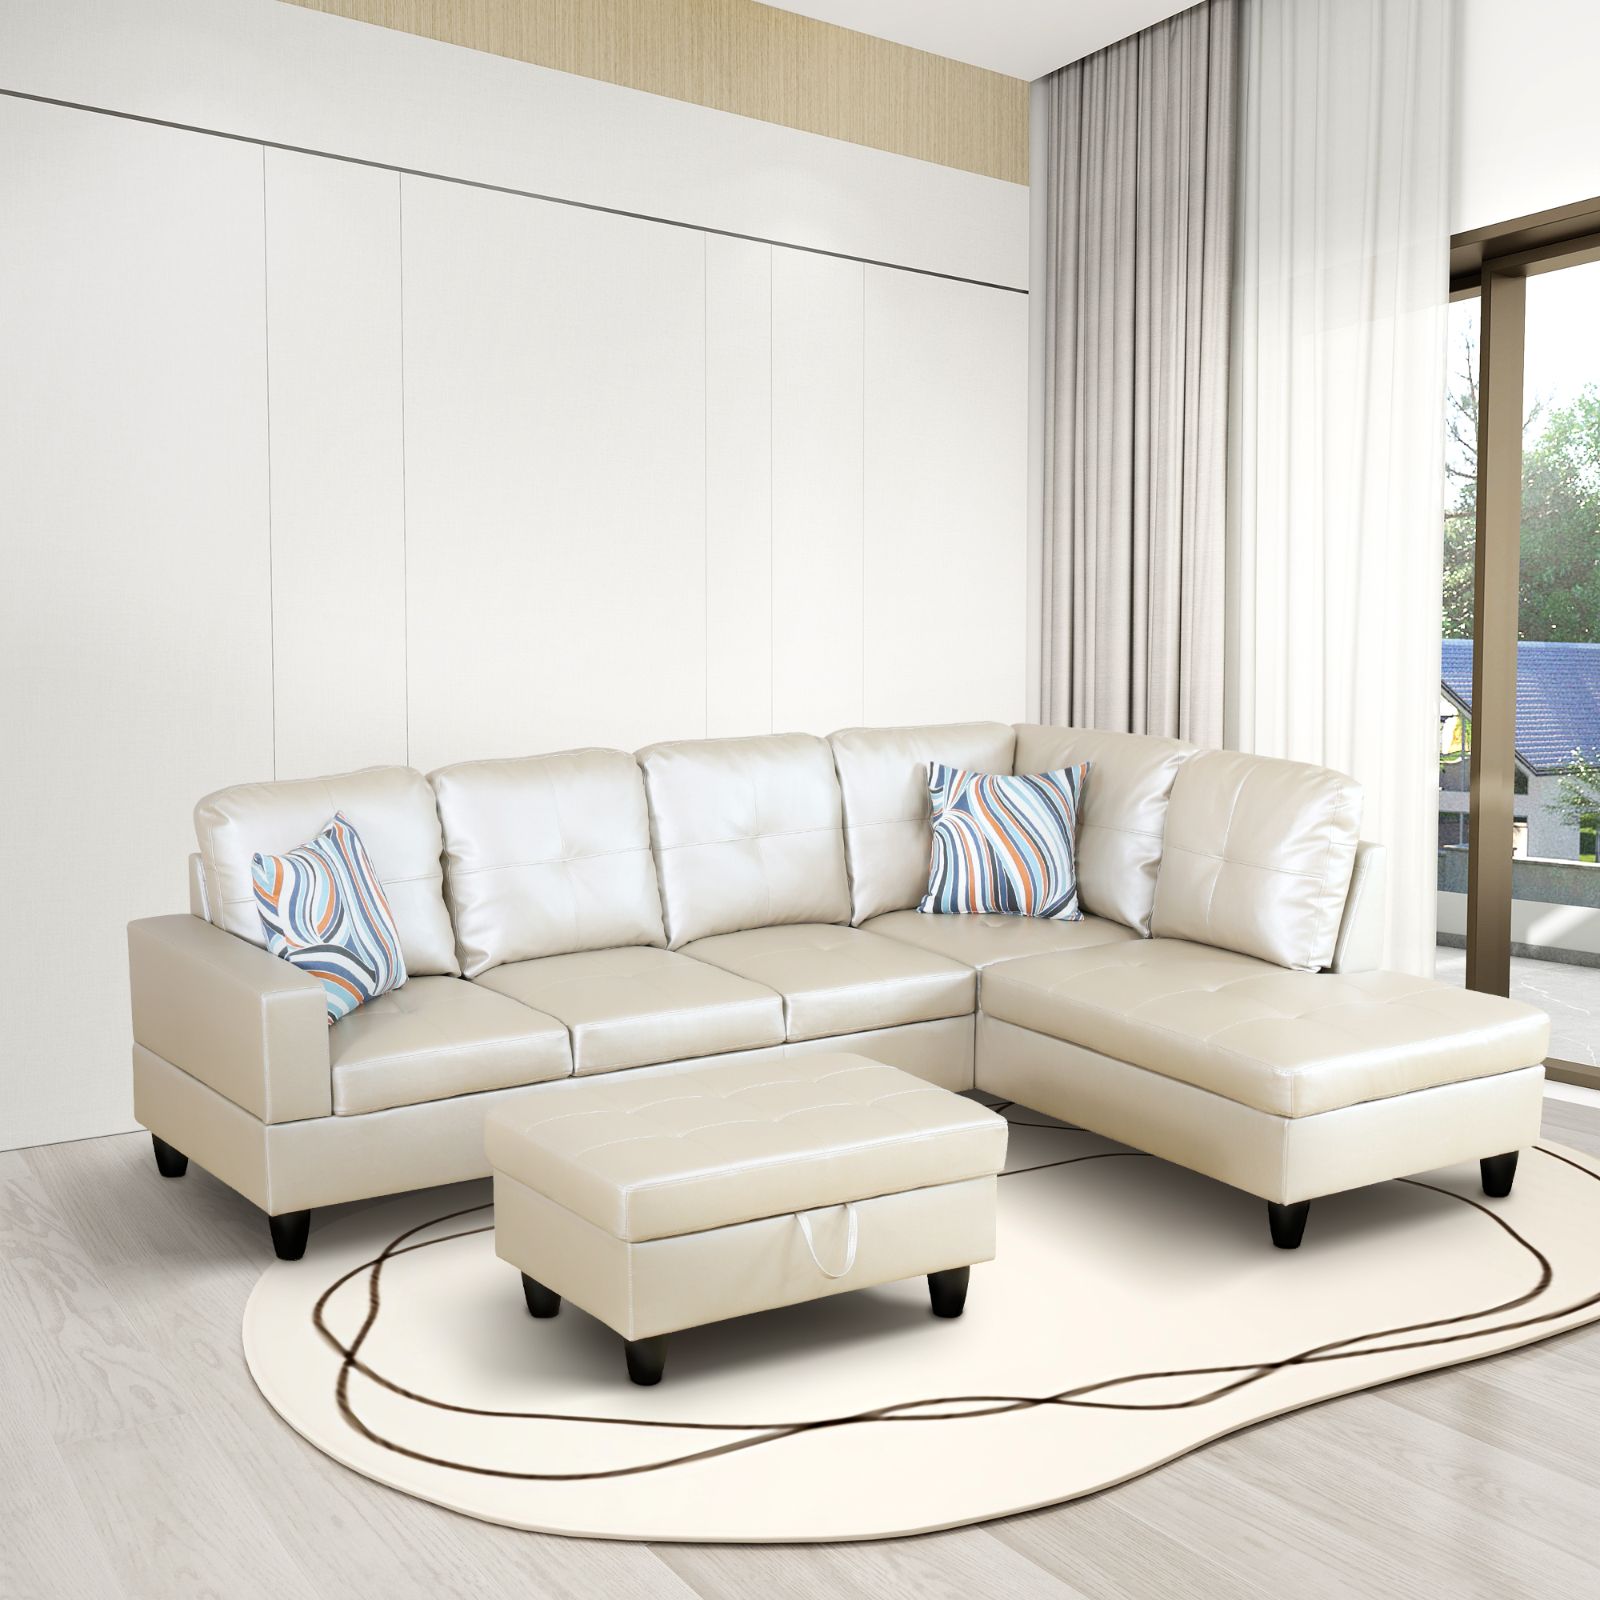 Ainehome Light Grey Semi PU Synthetic Leather 3-Piece Couch Living Room Sofa Set